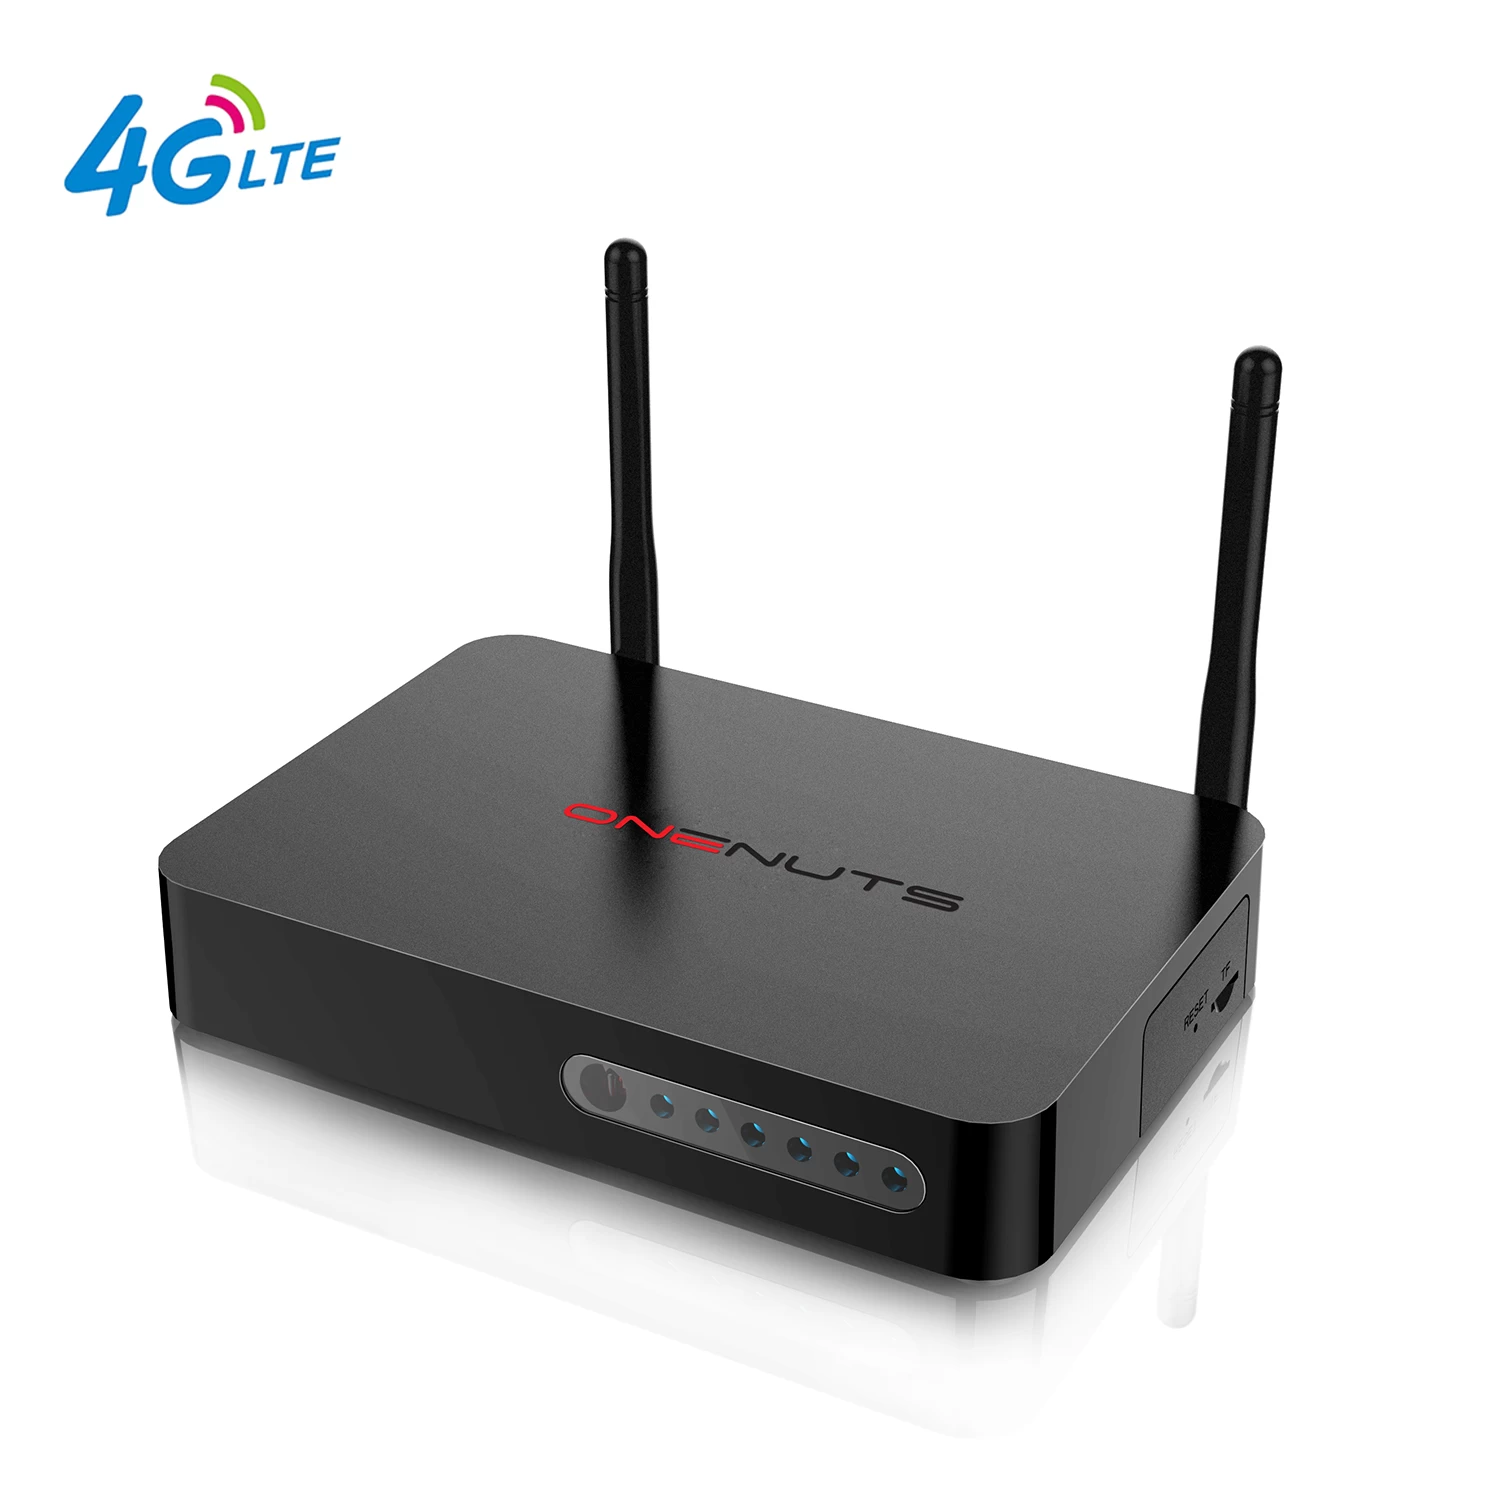 Onenuts Quad Core 4K Android 7.0 4G LTE Set-Top Box built in battery